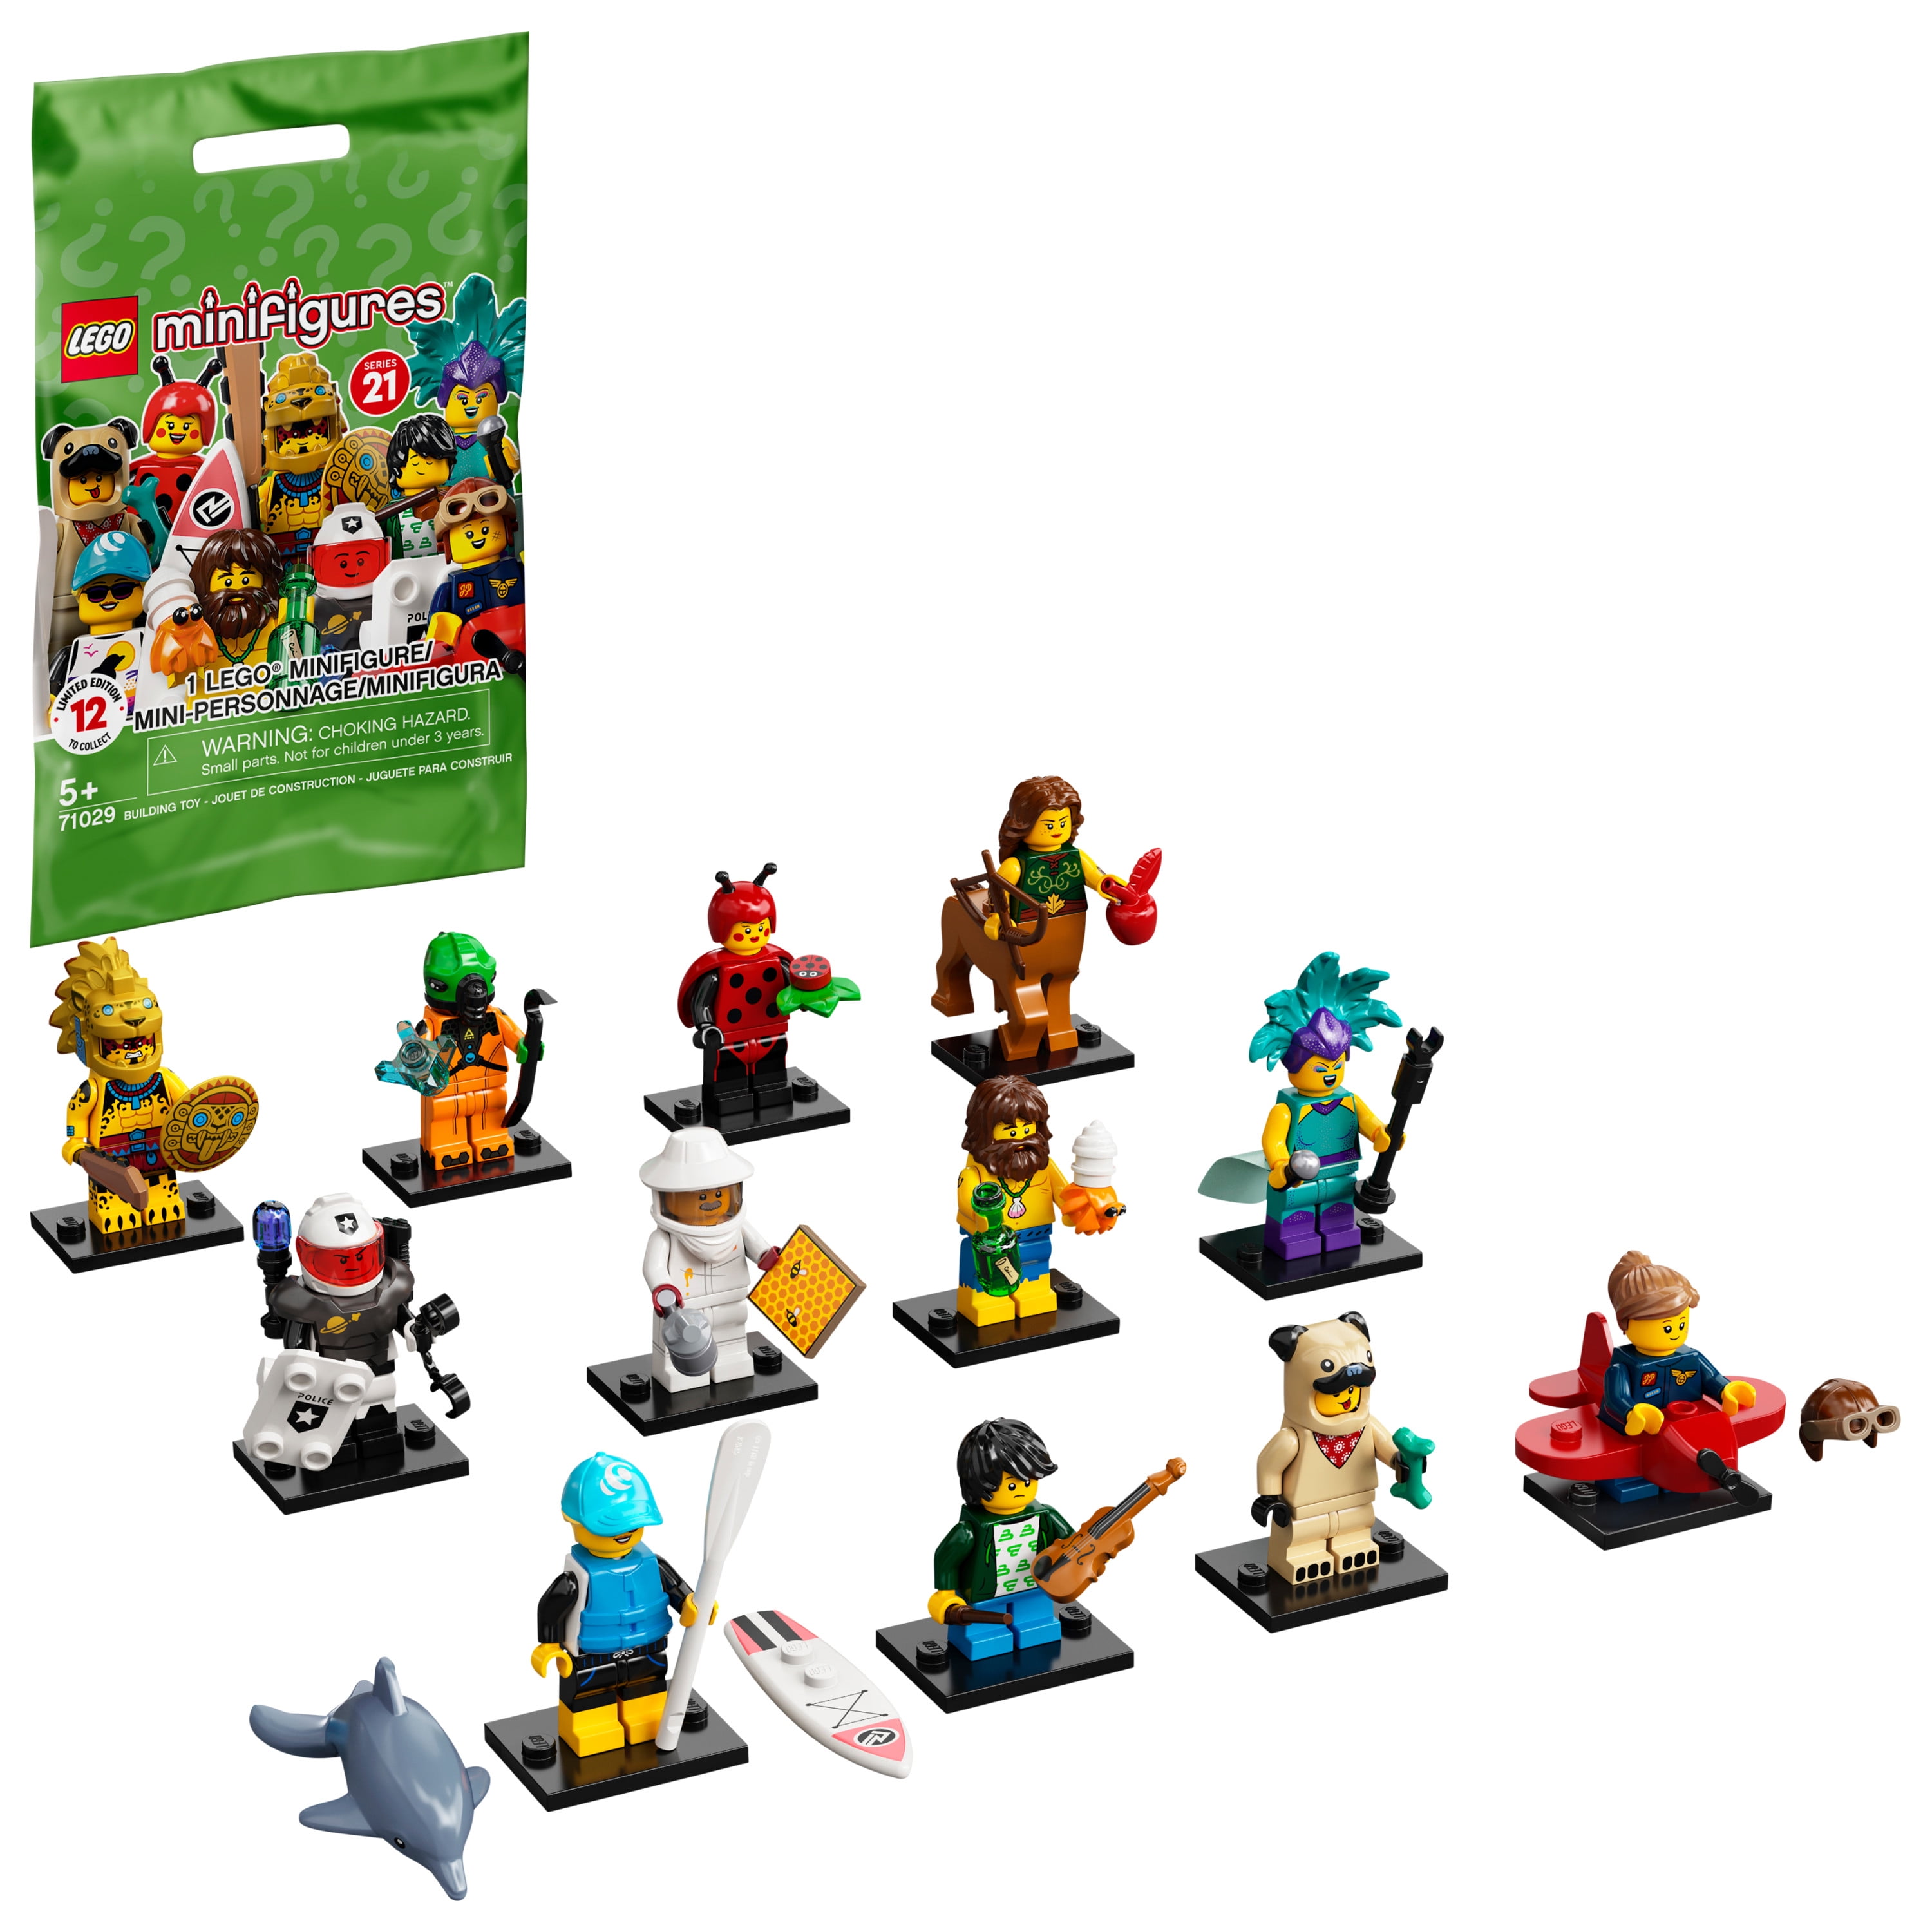 71024 LEGO Minifigures Disney series 2 character choices 1-8 